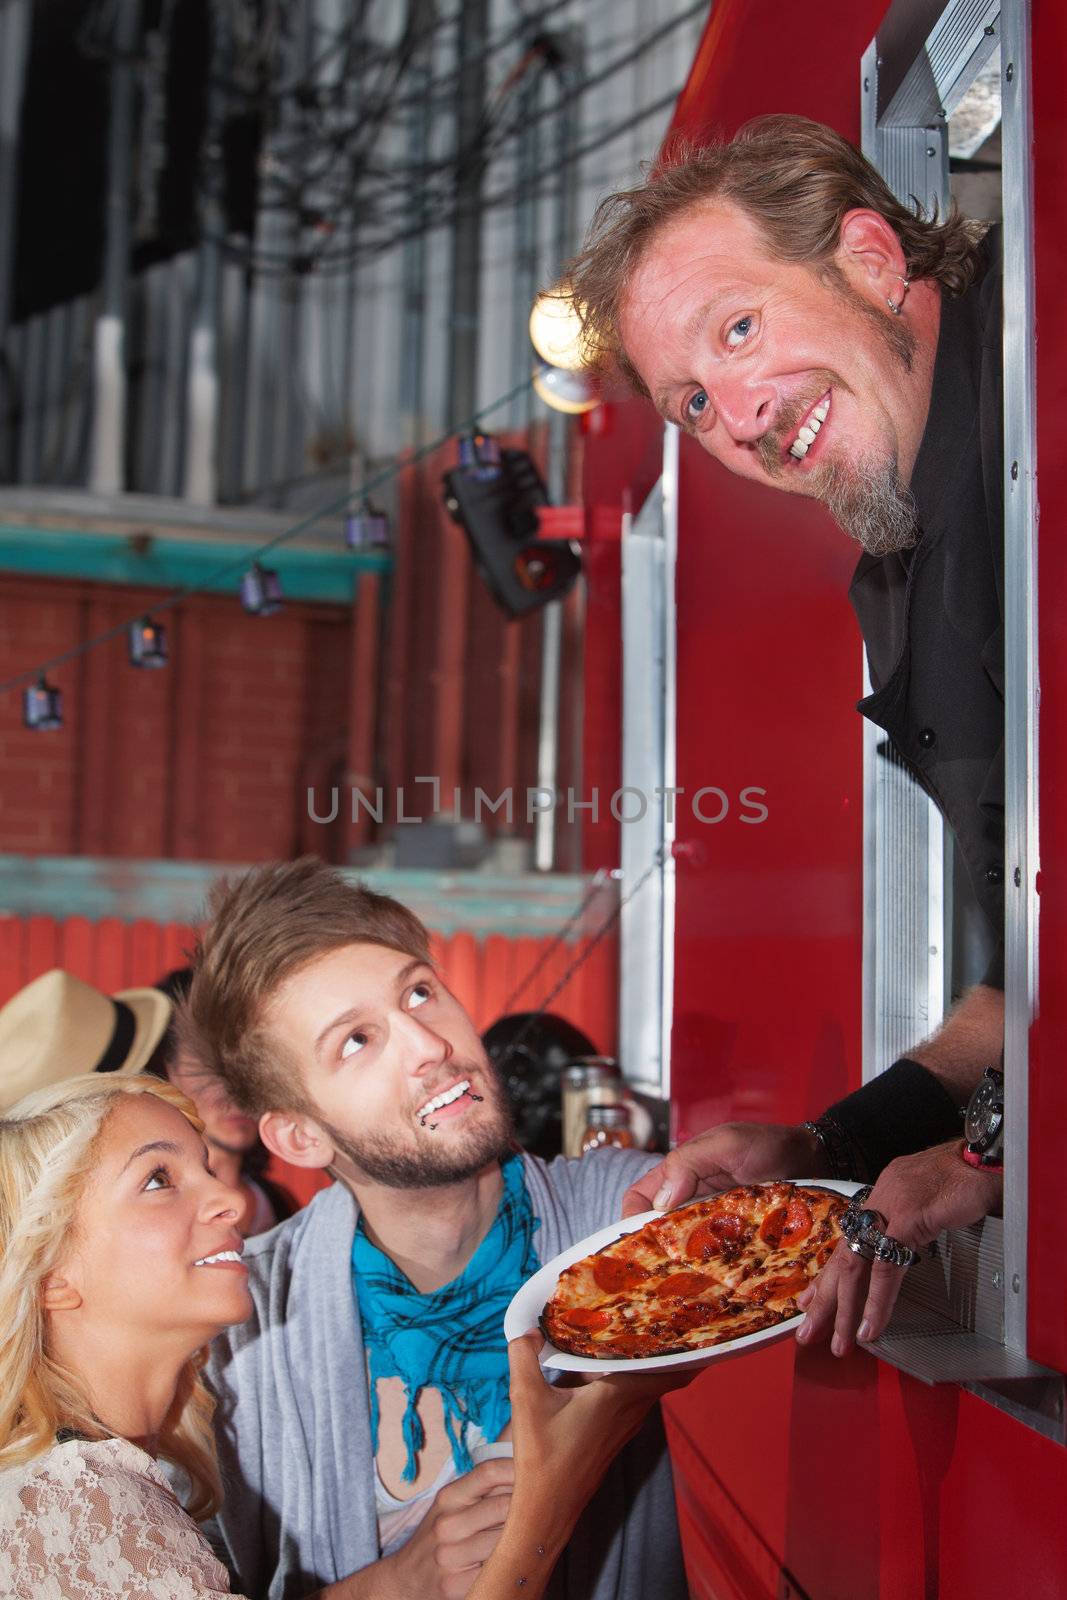 Chef with Pizza at Food Truck by Creatista